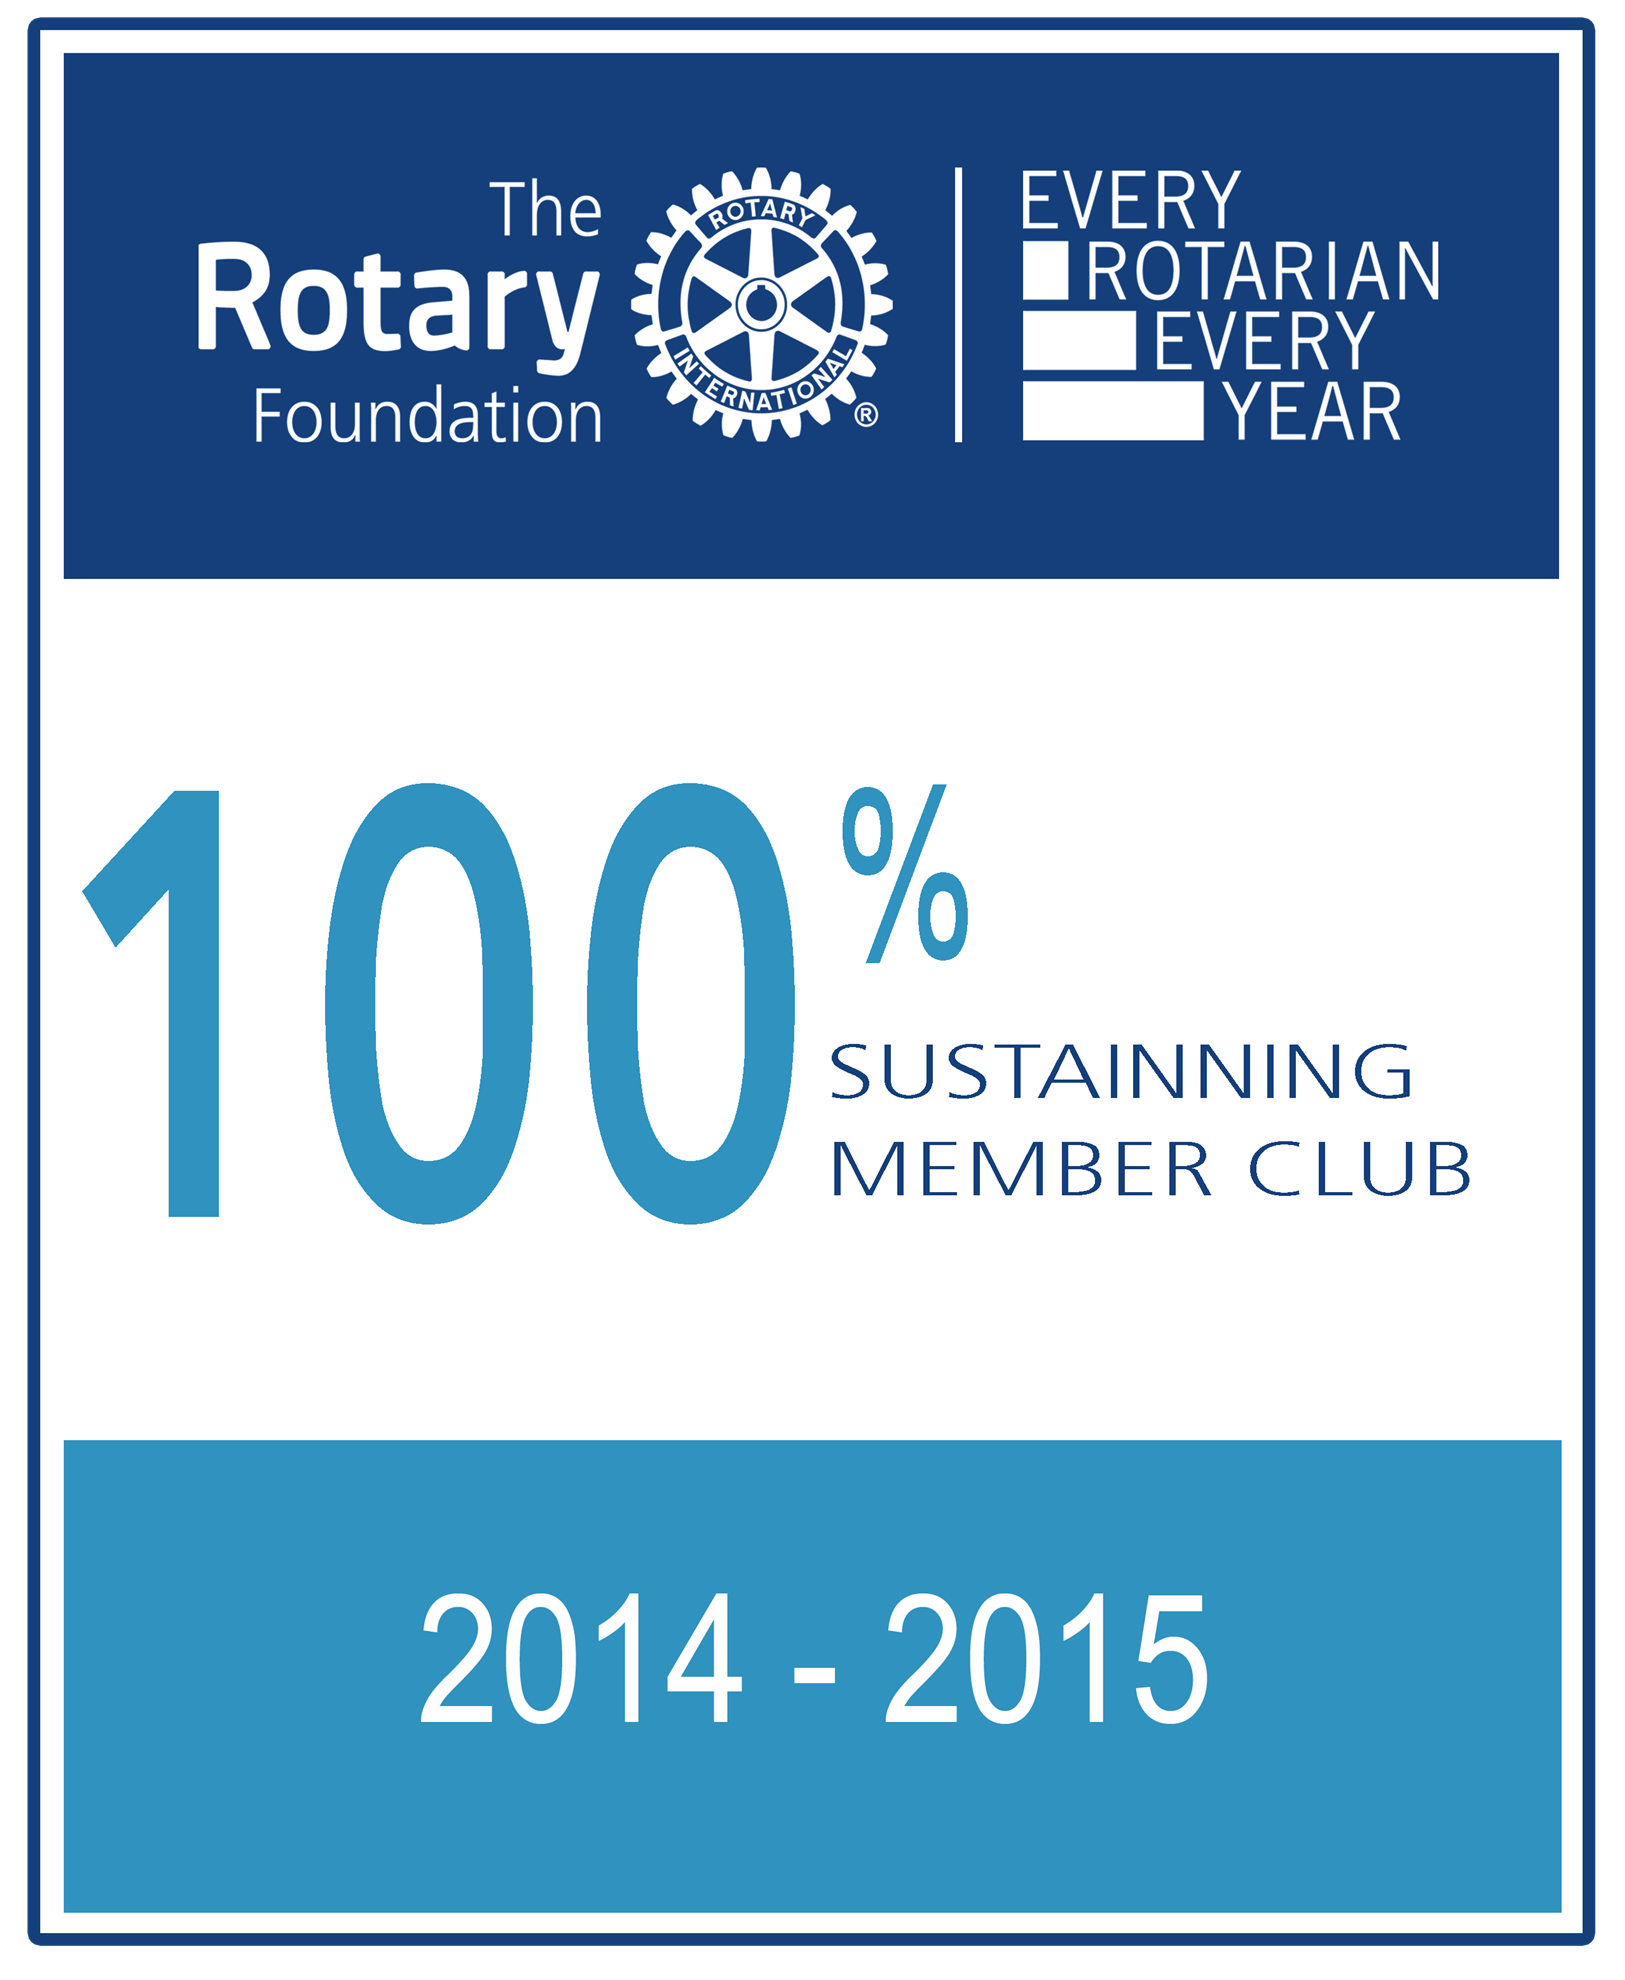 Rotary International and Club Custom Banners | Rotary Club of Sweetwater